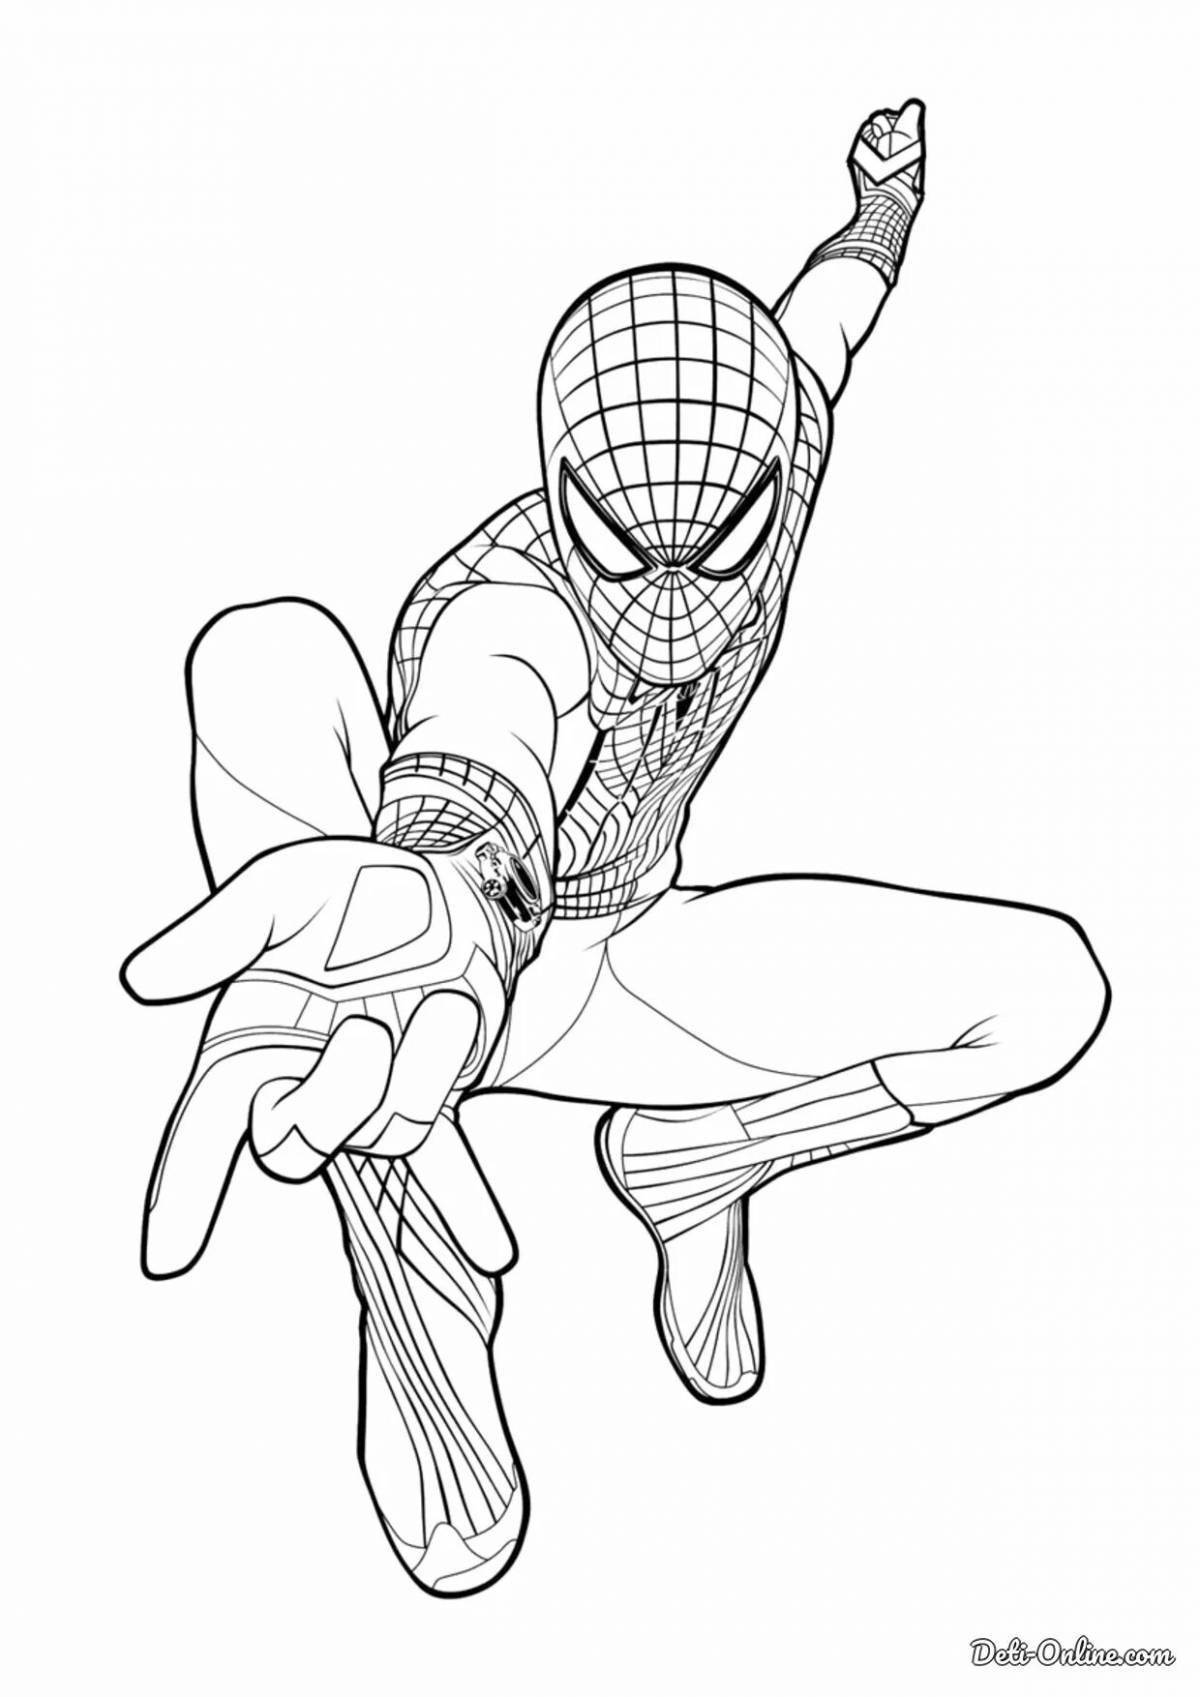 Spiderman dynamic coloring page